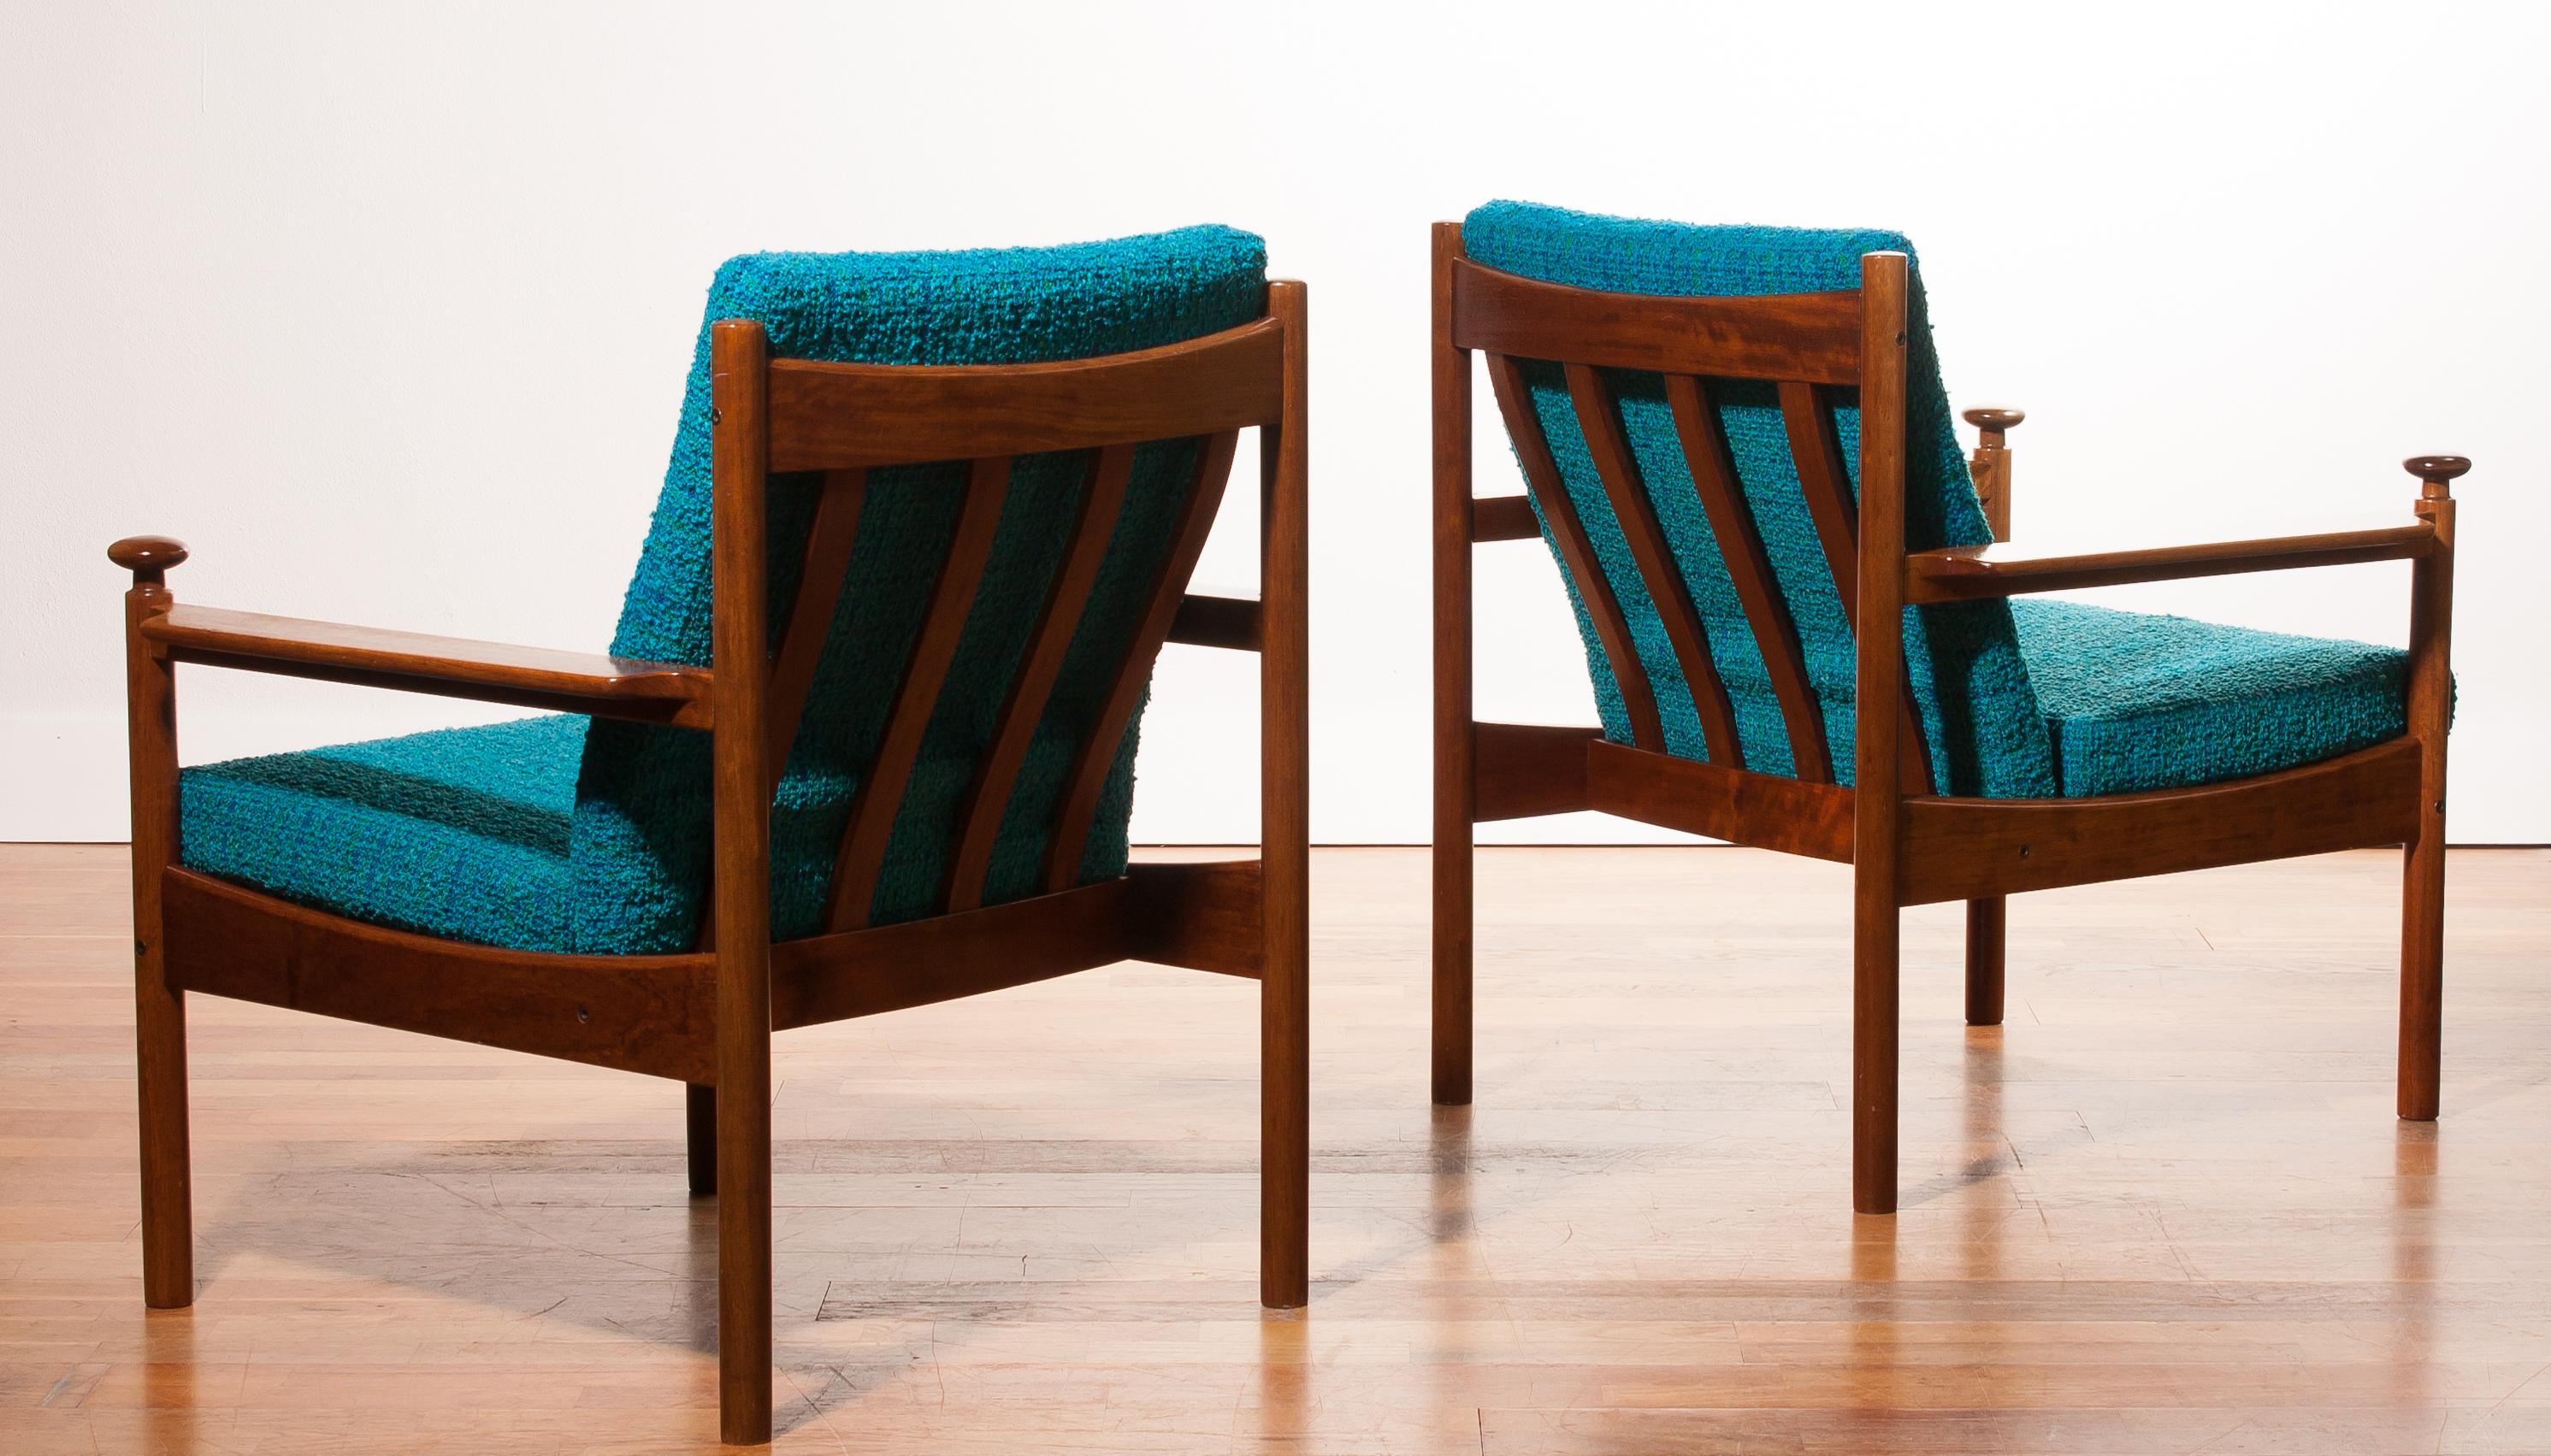 Mid-20th Century 1950s, a Pair of Chairs by Torbjørn Afdal for Sandvik & Co. Mobler